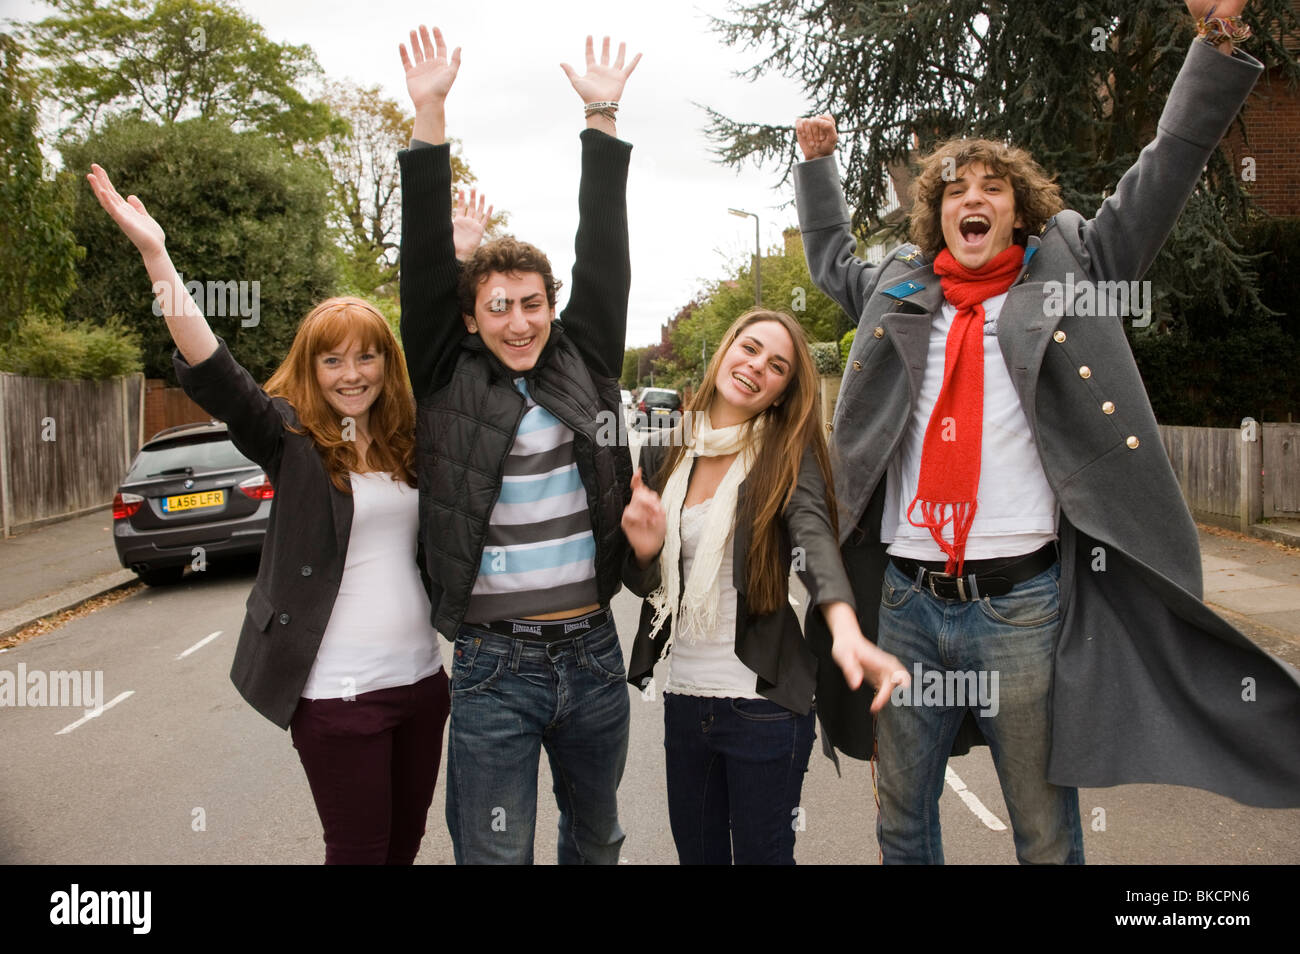 group of teenagers outside in the street leaping in the air as if they have finished school or exams and are celebrating Stock Photo